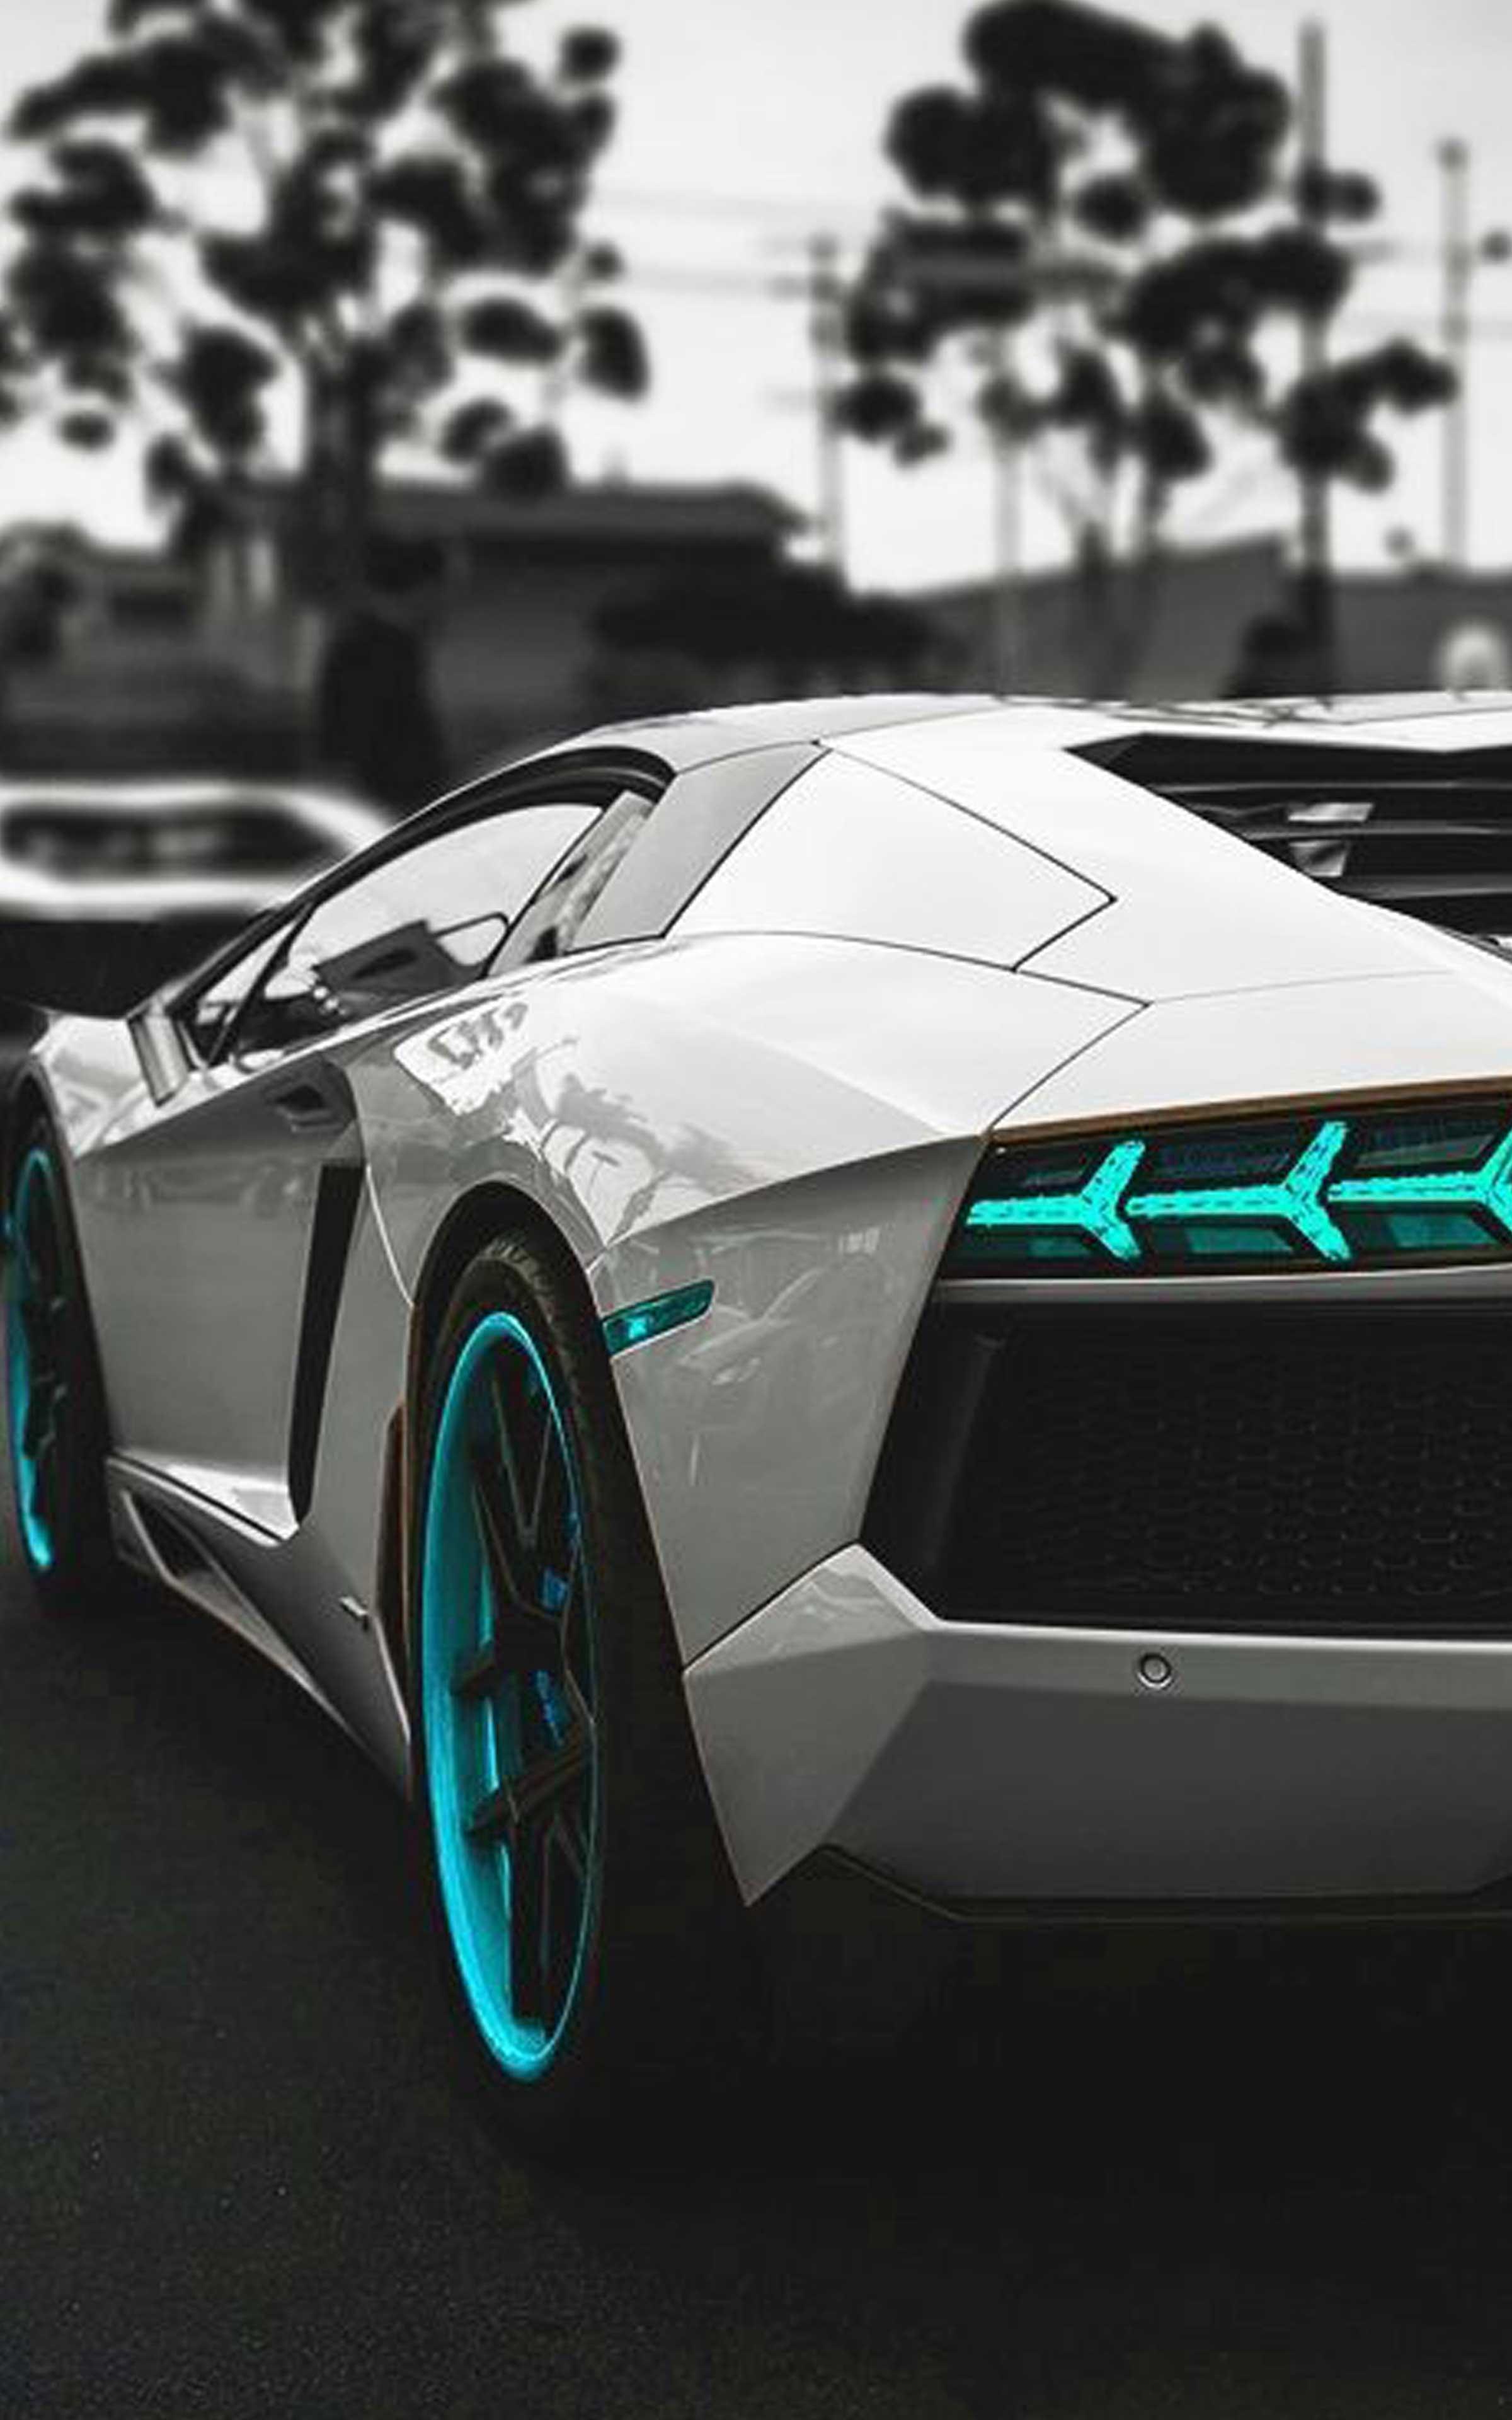 Lamborghini Wallpaper Lamborghini Wallpaper Mobile For Android